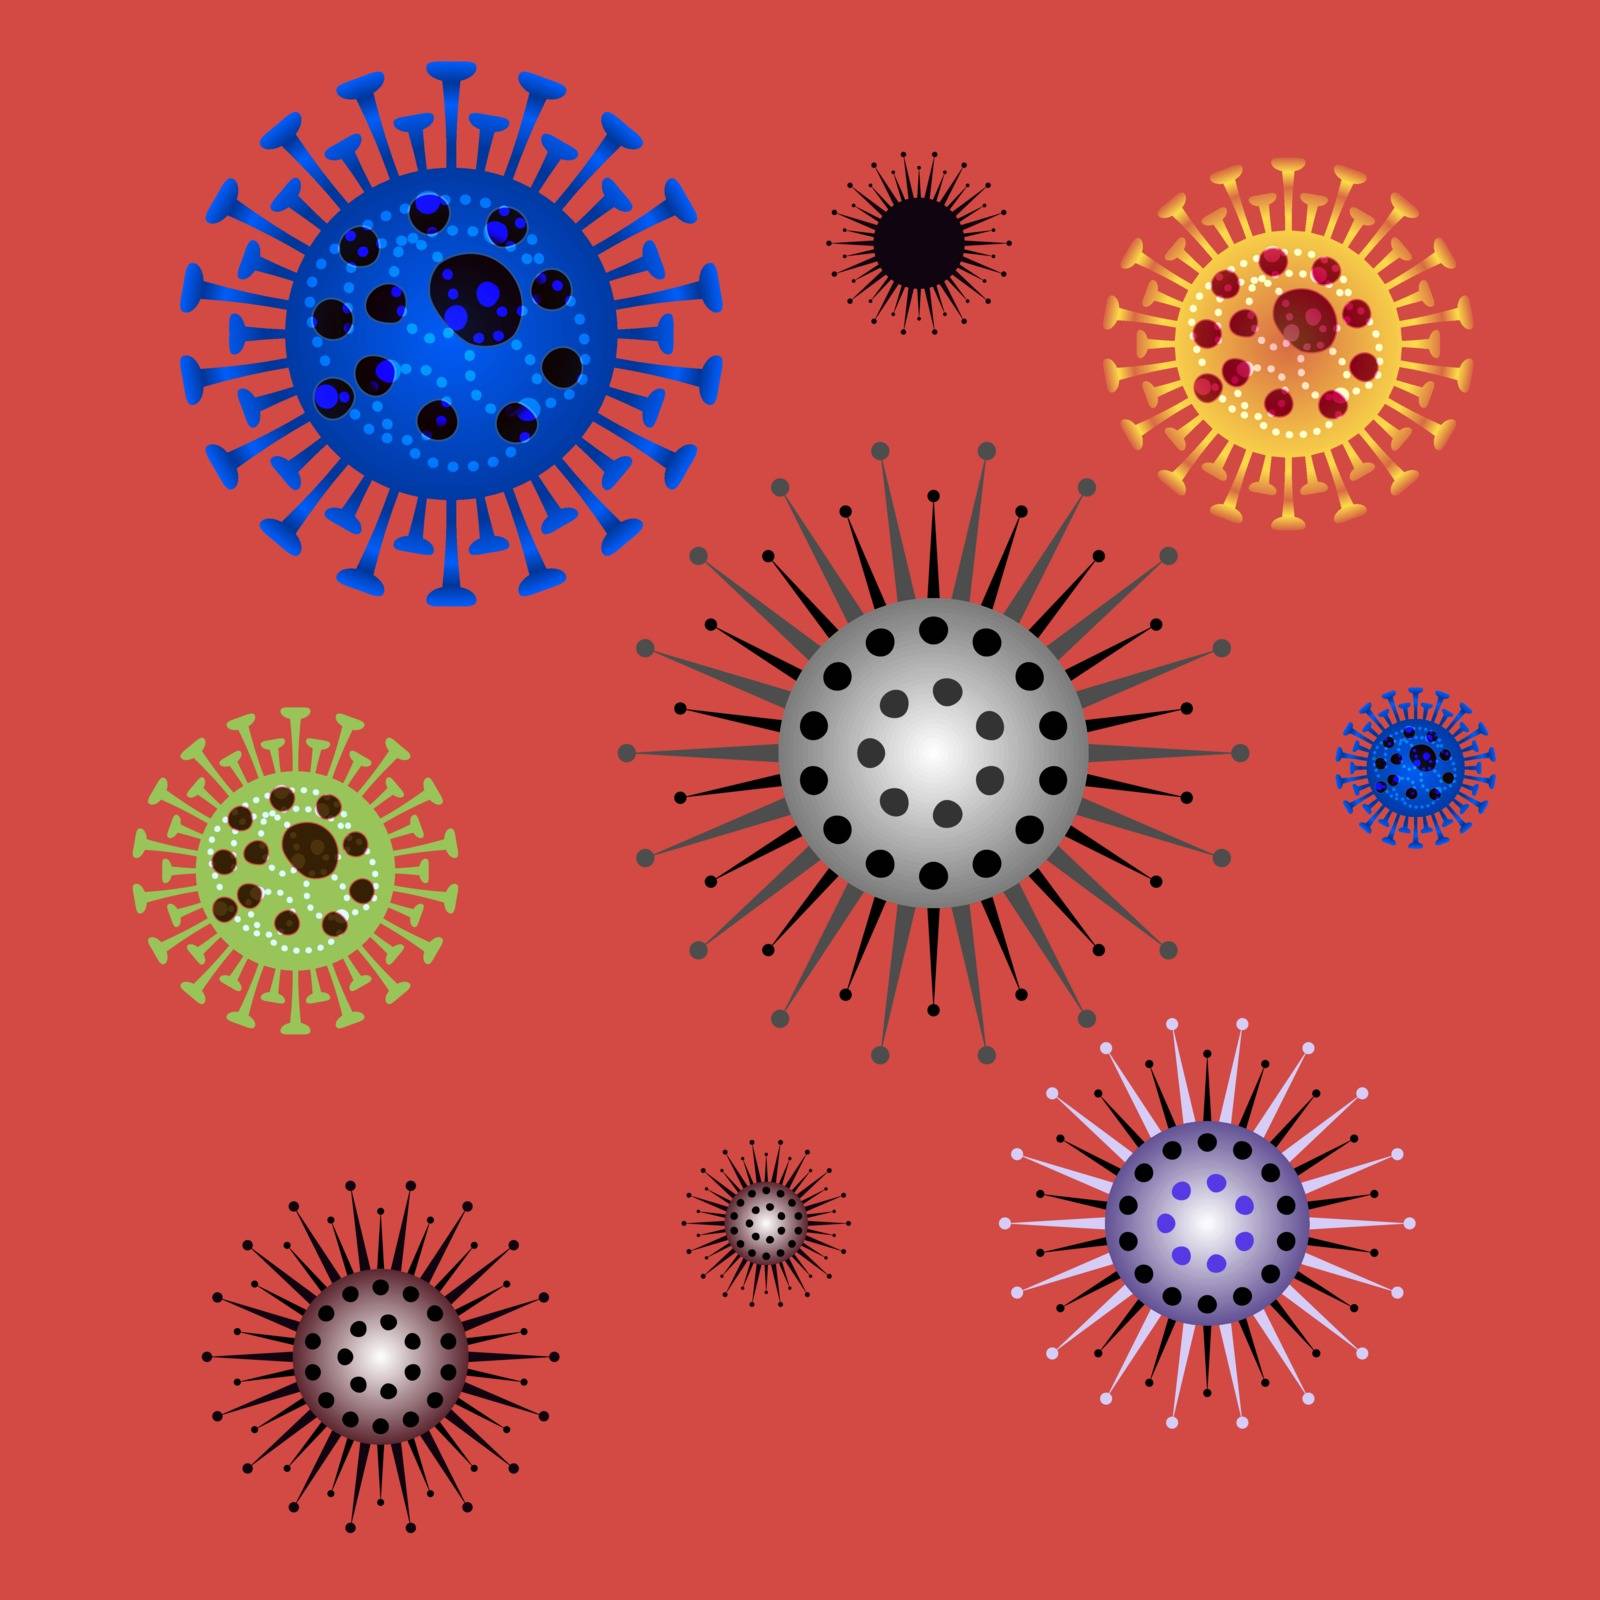 Coronavirus reproduction. Various modifications of viral strains. Pandemic concept with dangerous cells. Chinese Quarantine 2019-nCoV. Pathogen pneumonia laboratory tests. Medical vector illustration